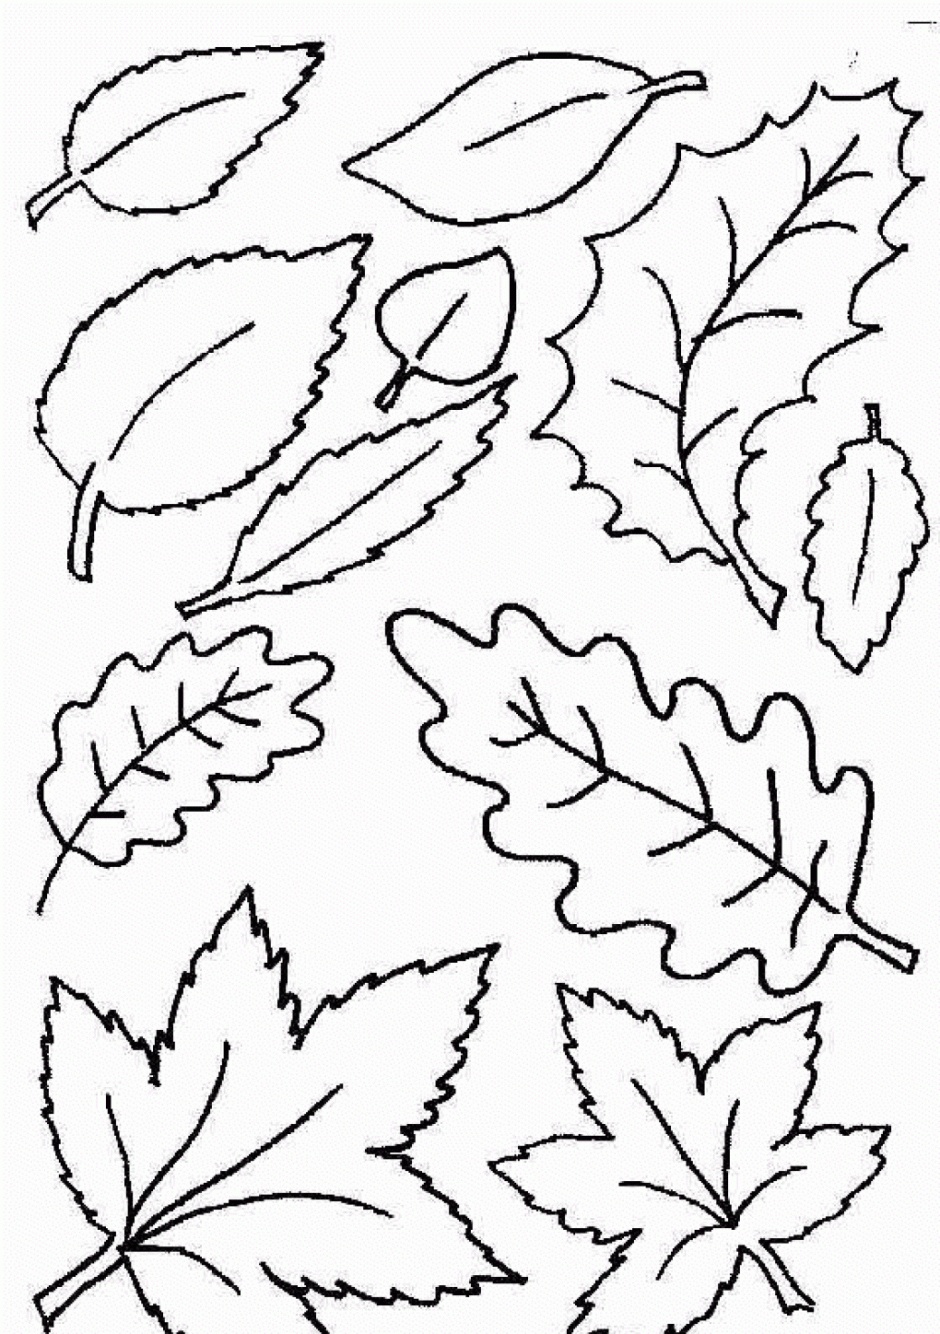 Coloring Ideas : Free Printable Leaf Coloring Pages Fall Leaves And - Free Printable Leaf Coloring Pages